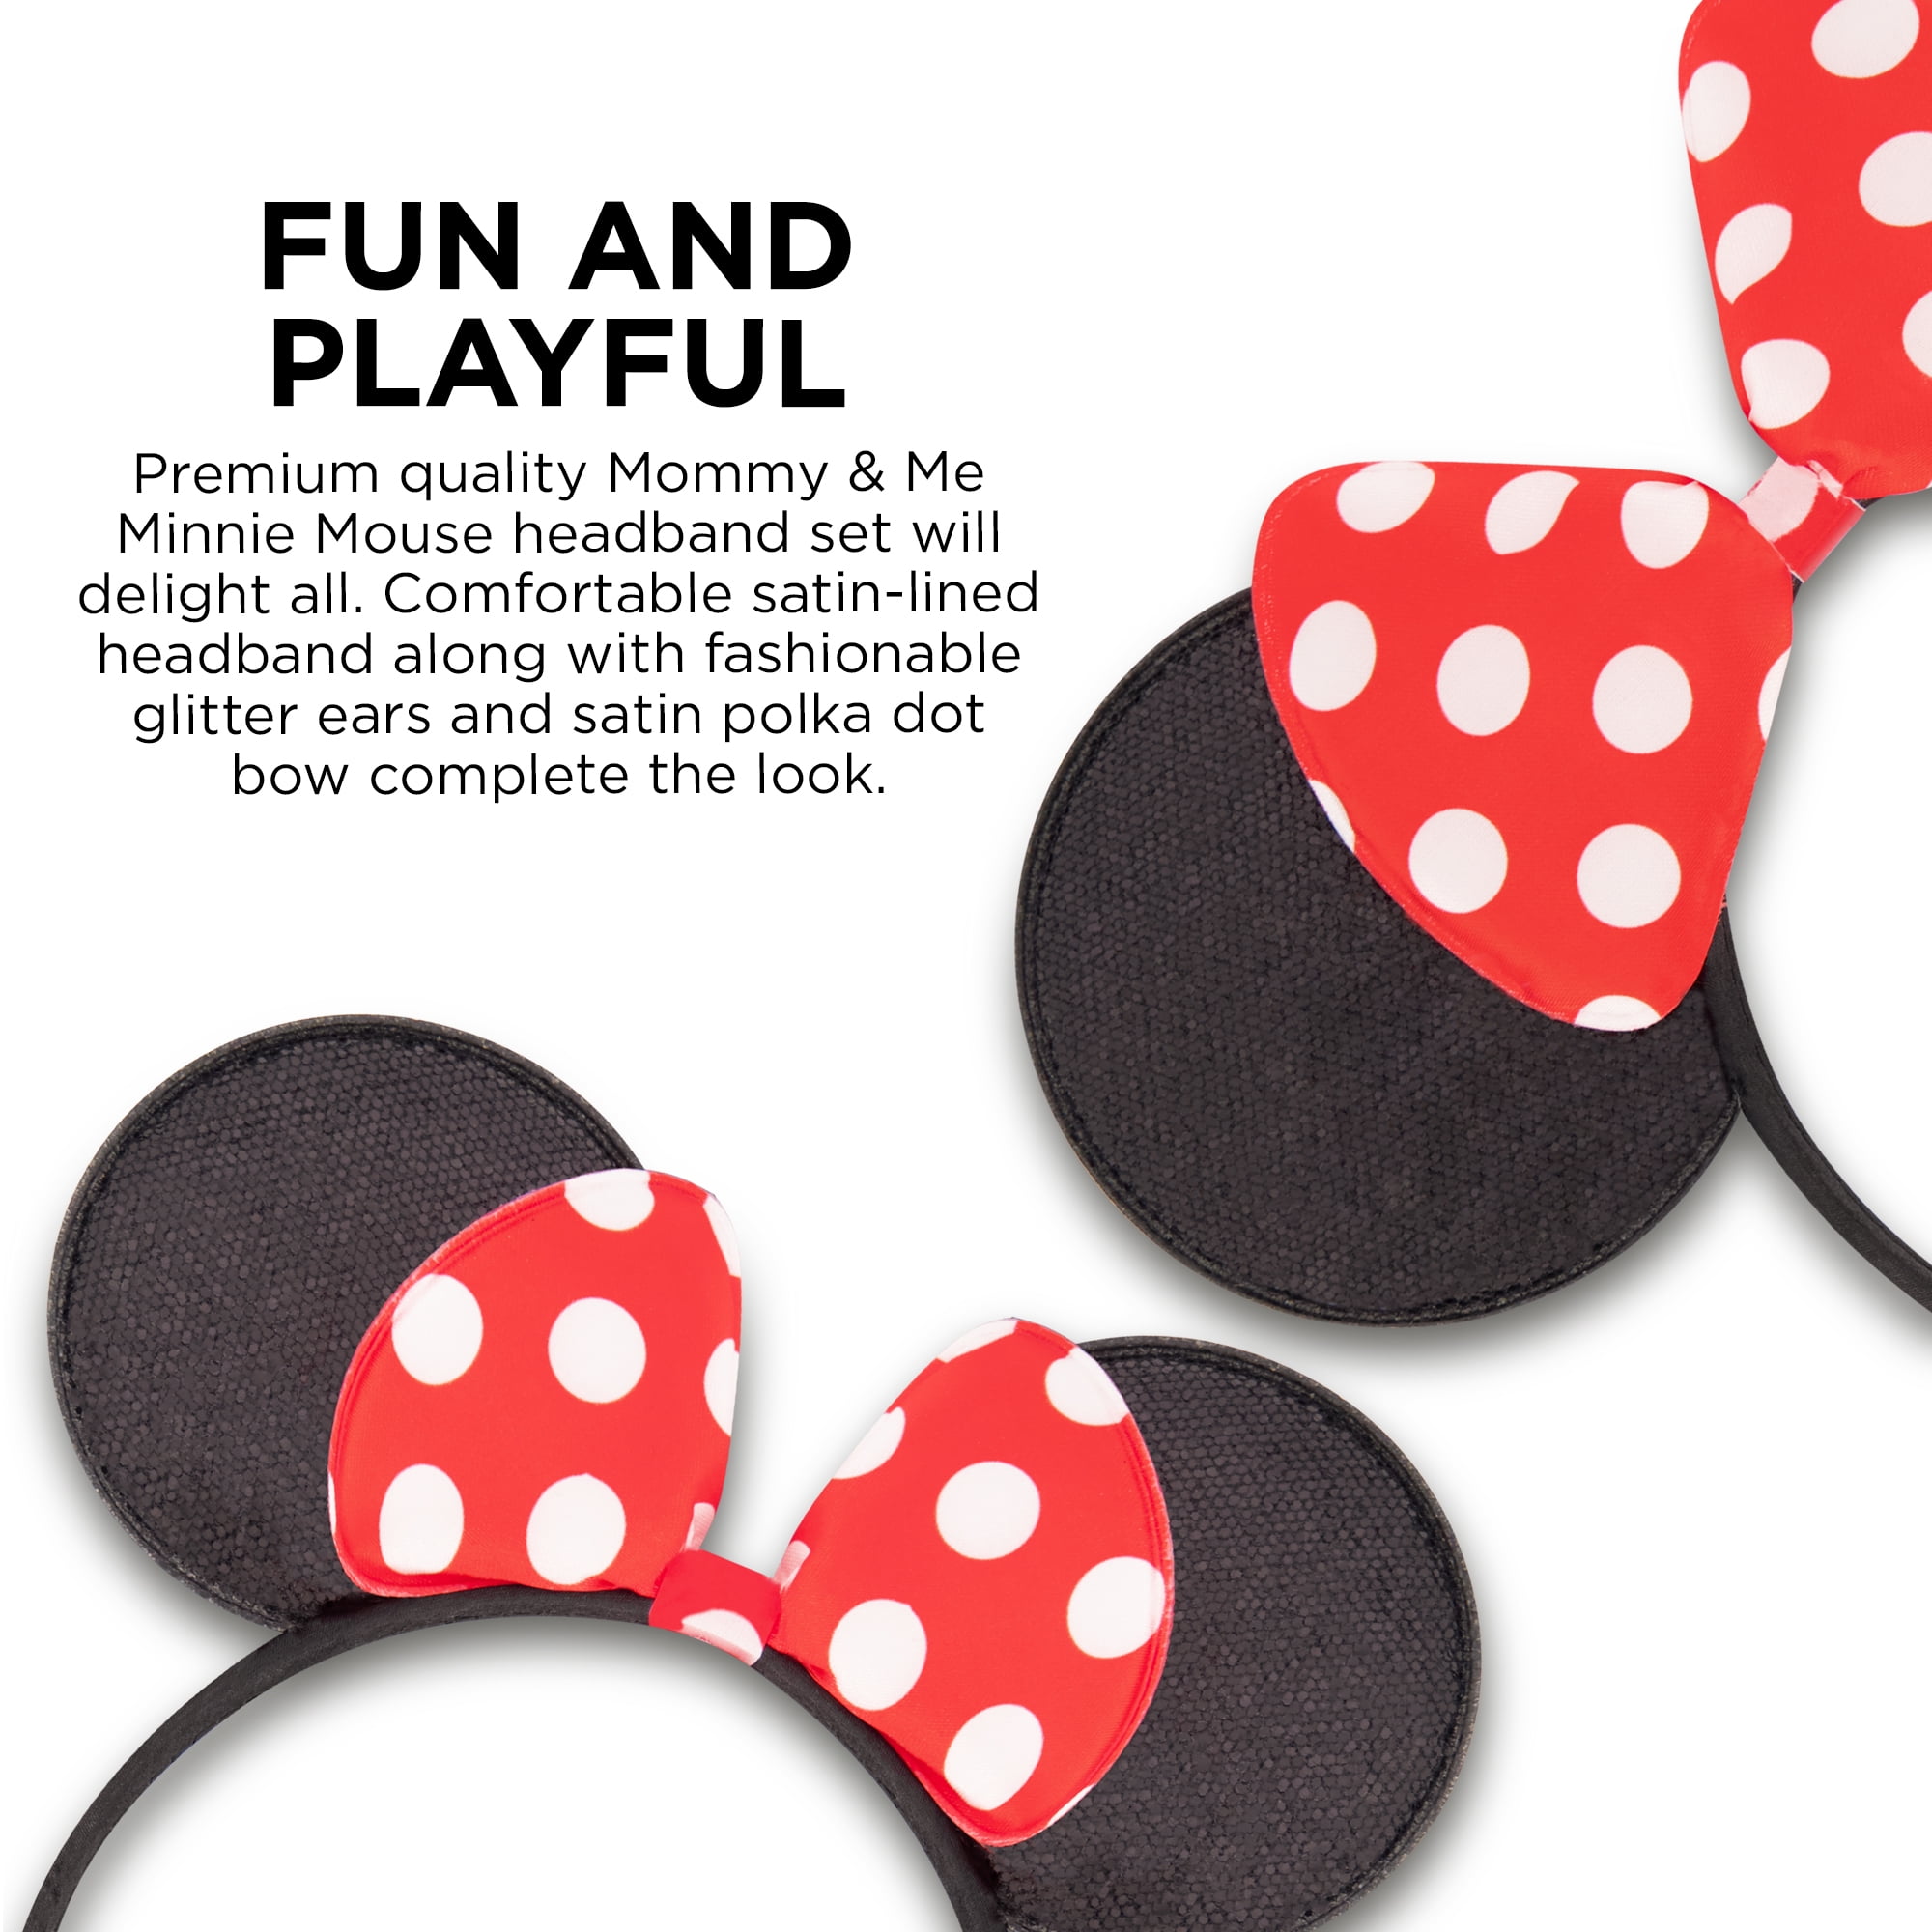 Disney Little Minnie Mouse Headband Set of 2 for Mommy Matching Ears Adult Size and One for Girls Ages 2-7 